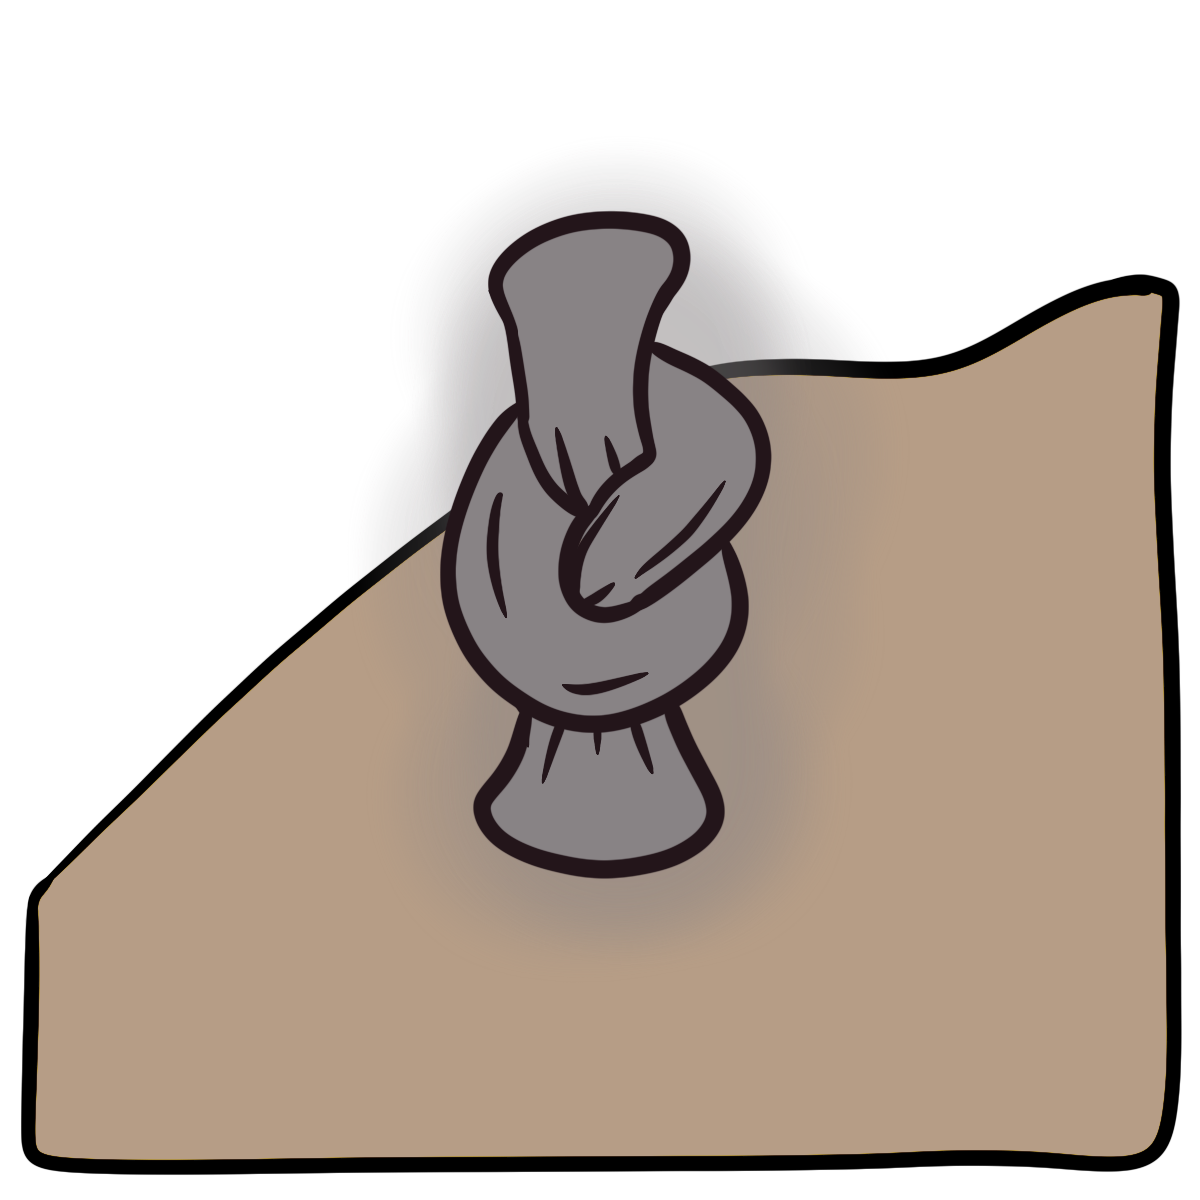 A vertical gray glowing blob tied in a knot in the center. Curved beige fills the bottom half of the background.